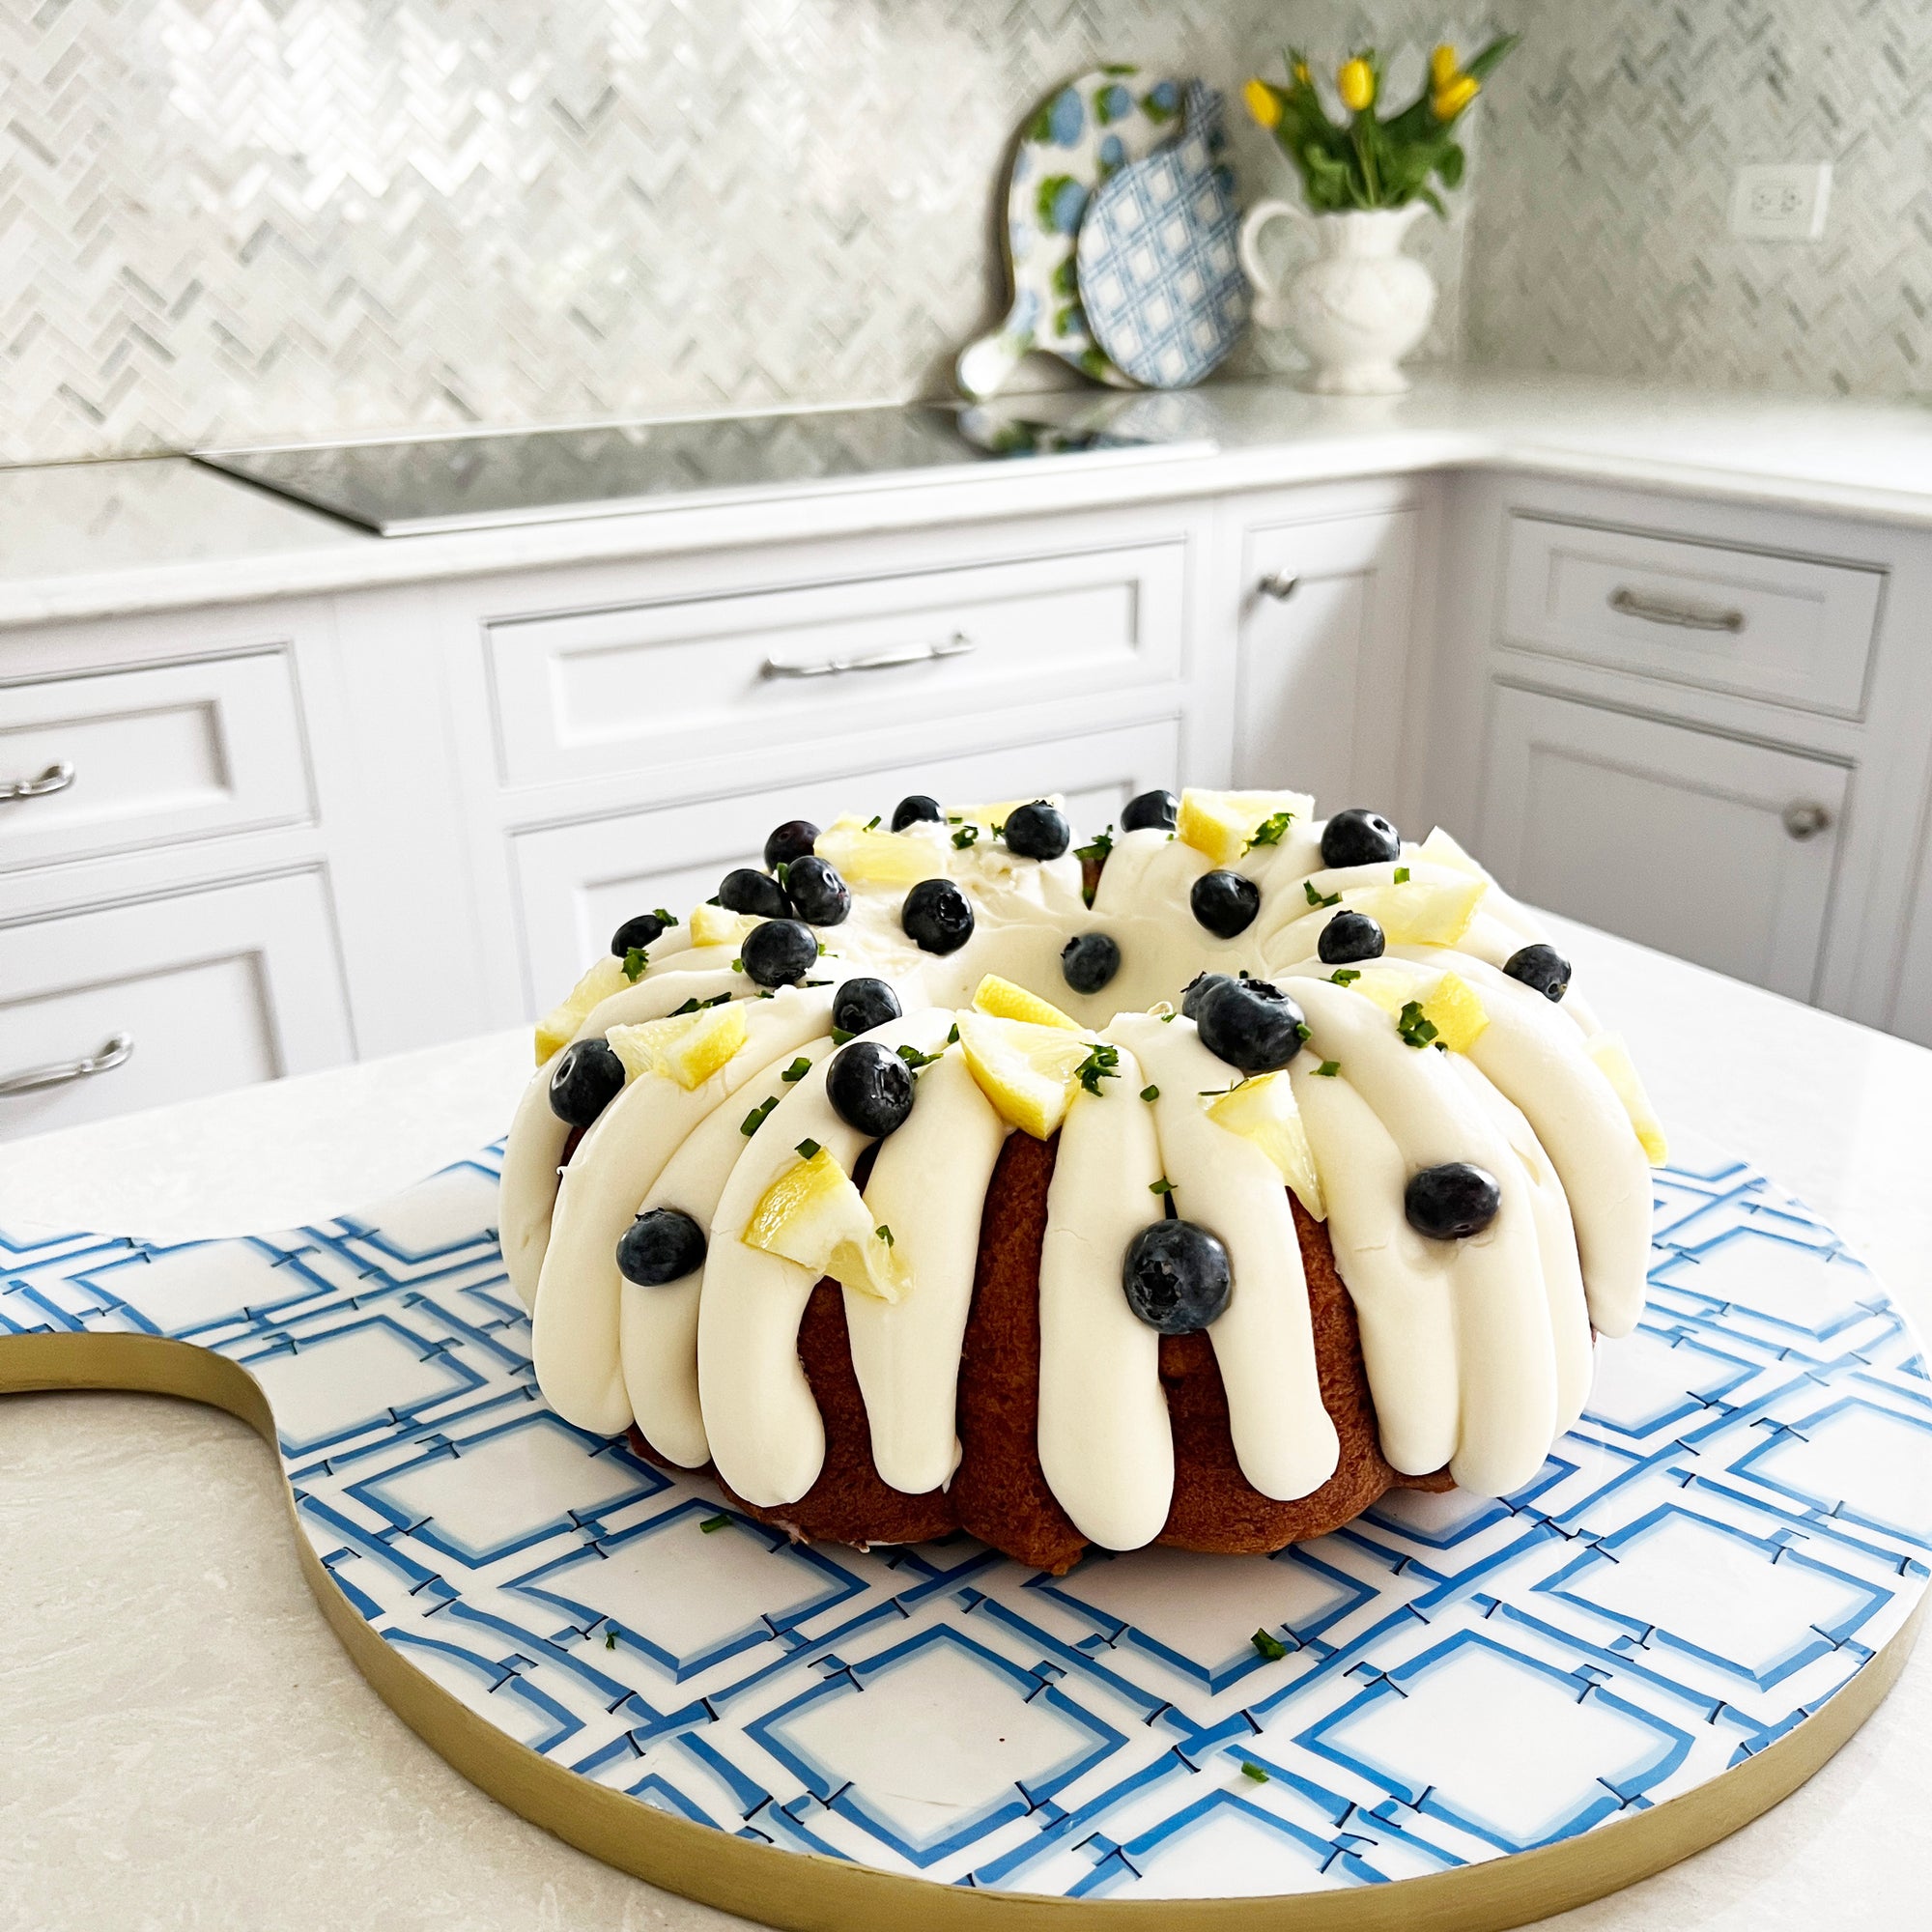 Dress Up a Store-Bought Bundt Cake with Kelly